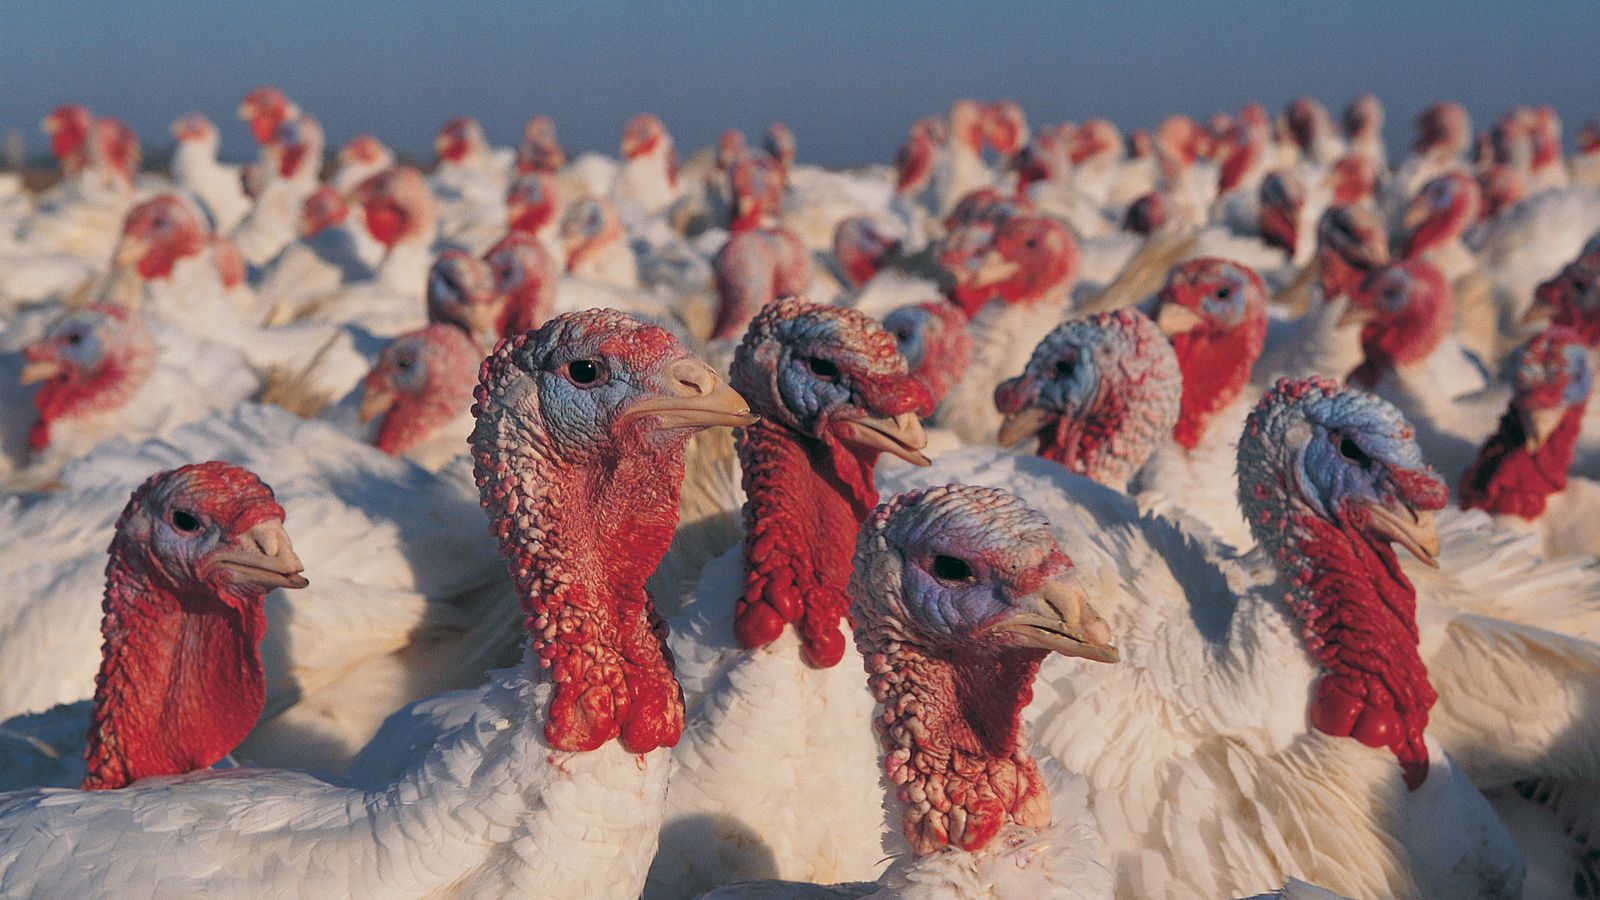 6 states produce almost all the turkey in the US - Vox